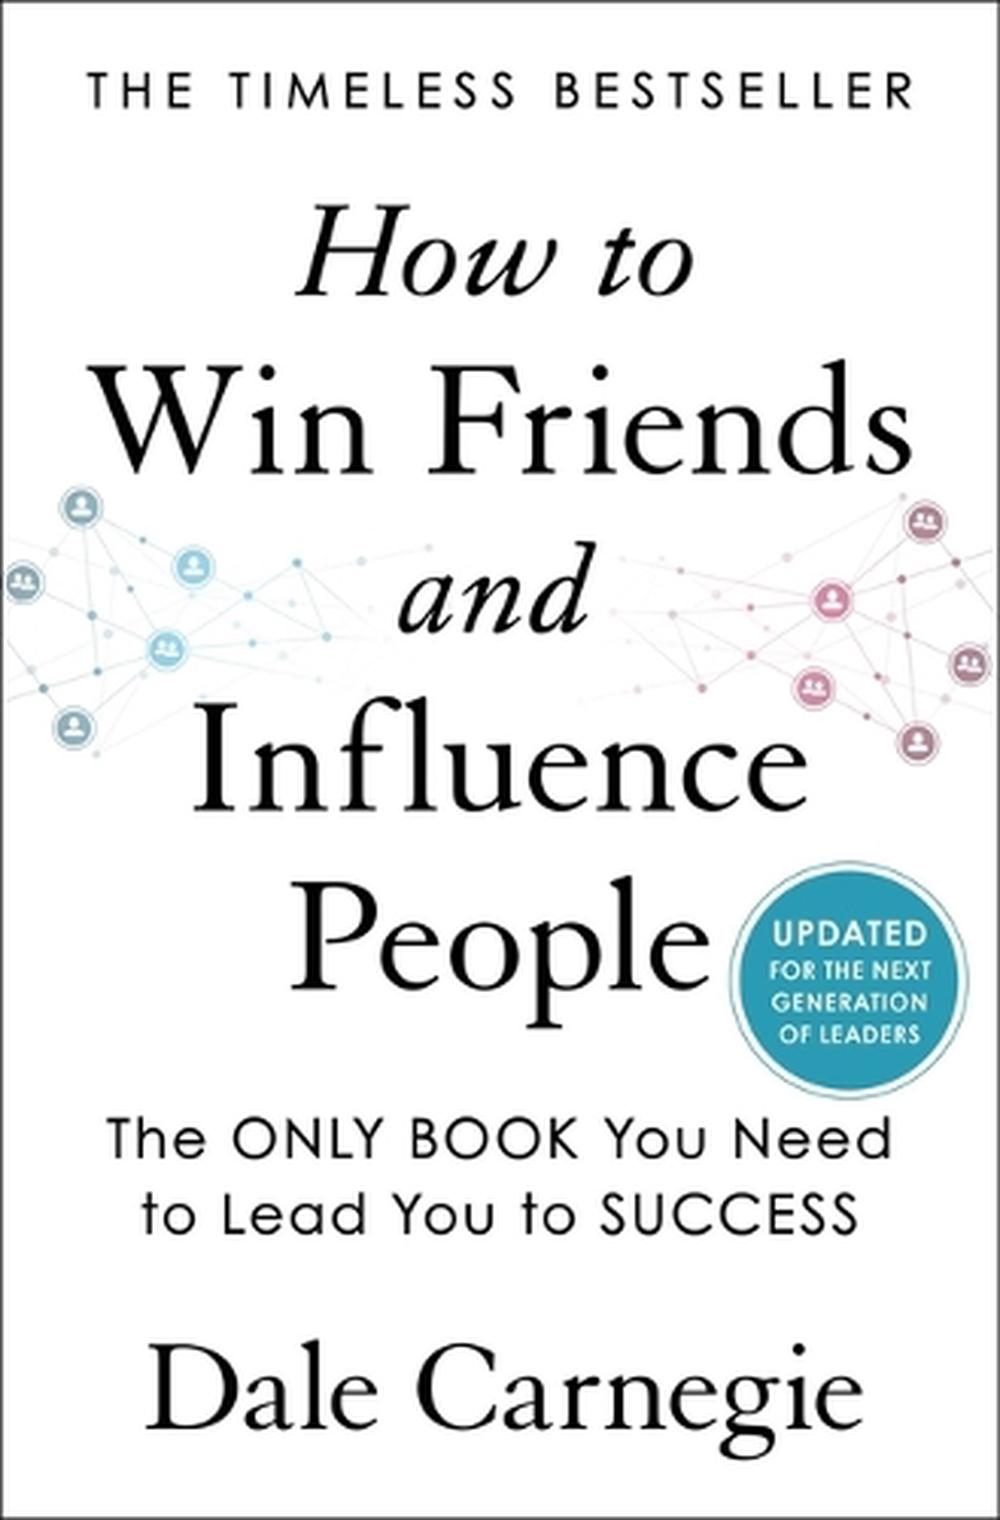 by　online　Buy　People　Win　9781982171452　How　Hardcover,　Carnegie,　Dale　Nile　and　Friends　to　The　Influence　at